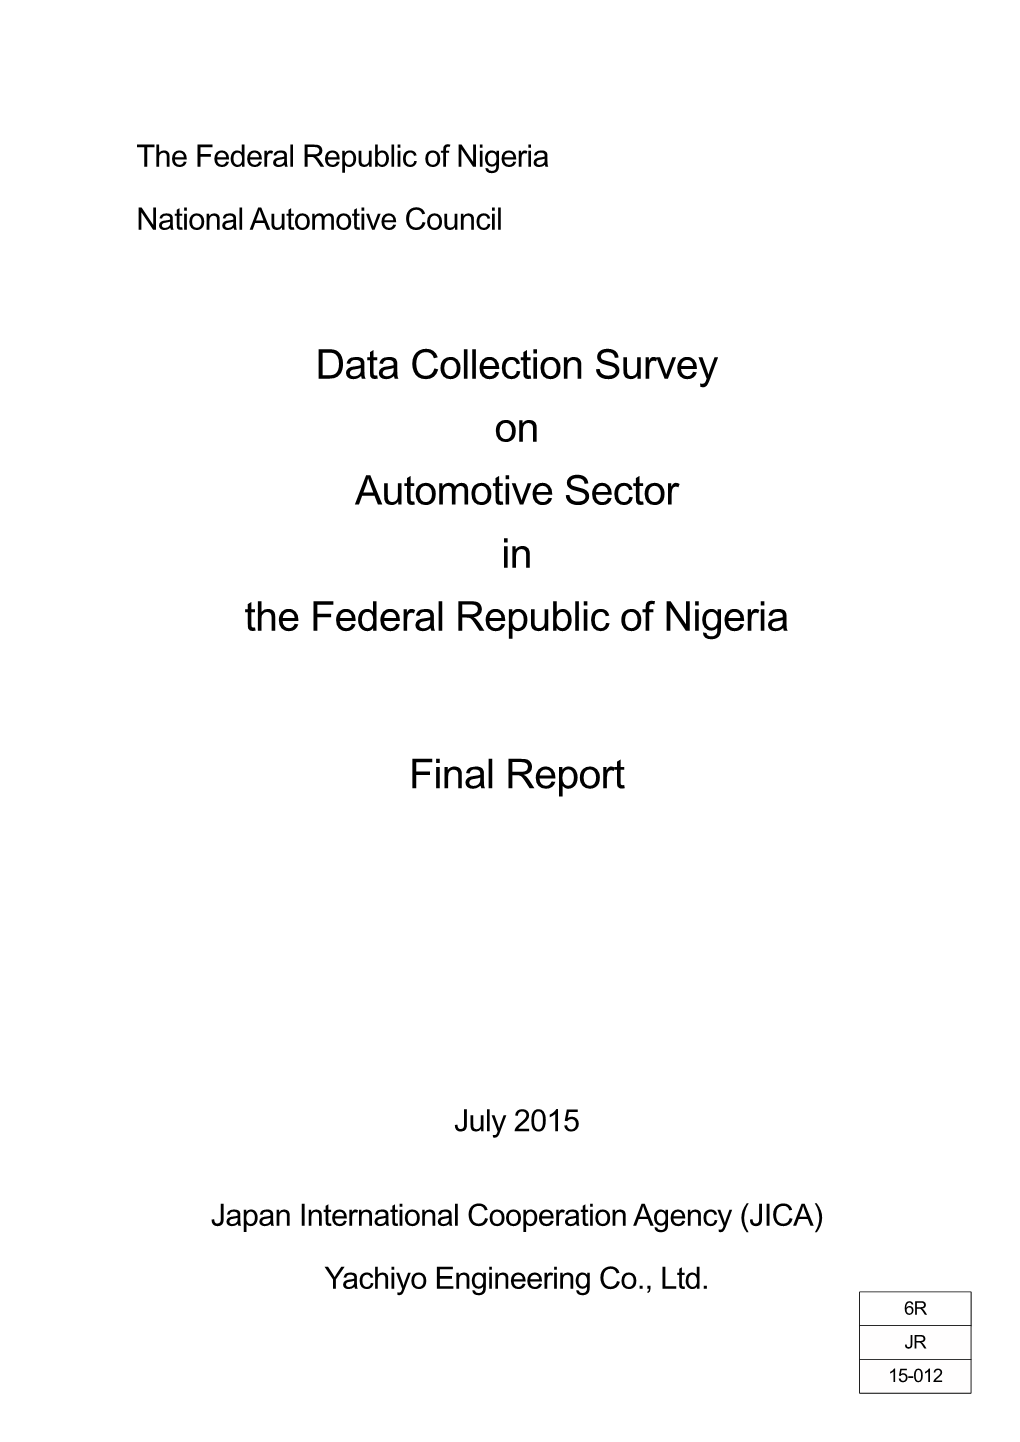 Data Collection Survey on Automotive Sector in the Federal Republic of Nigeria